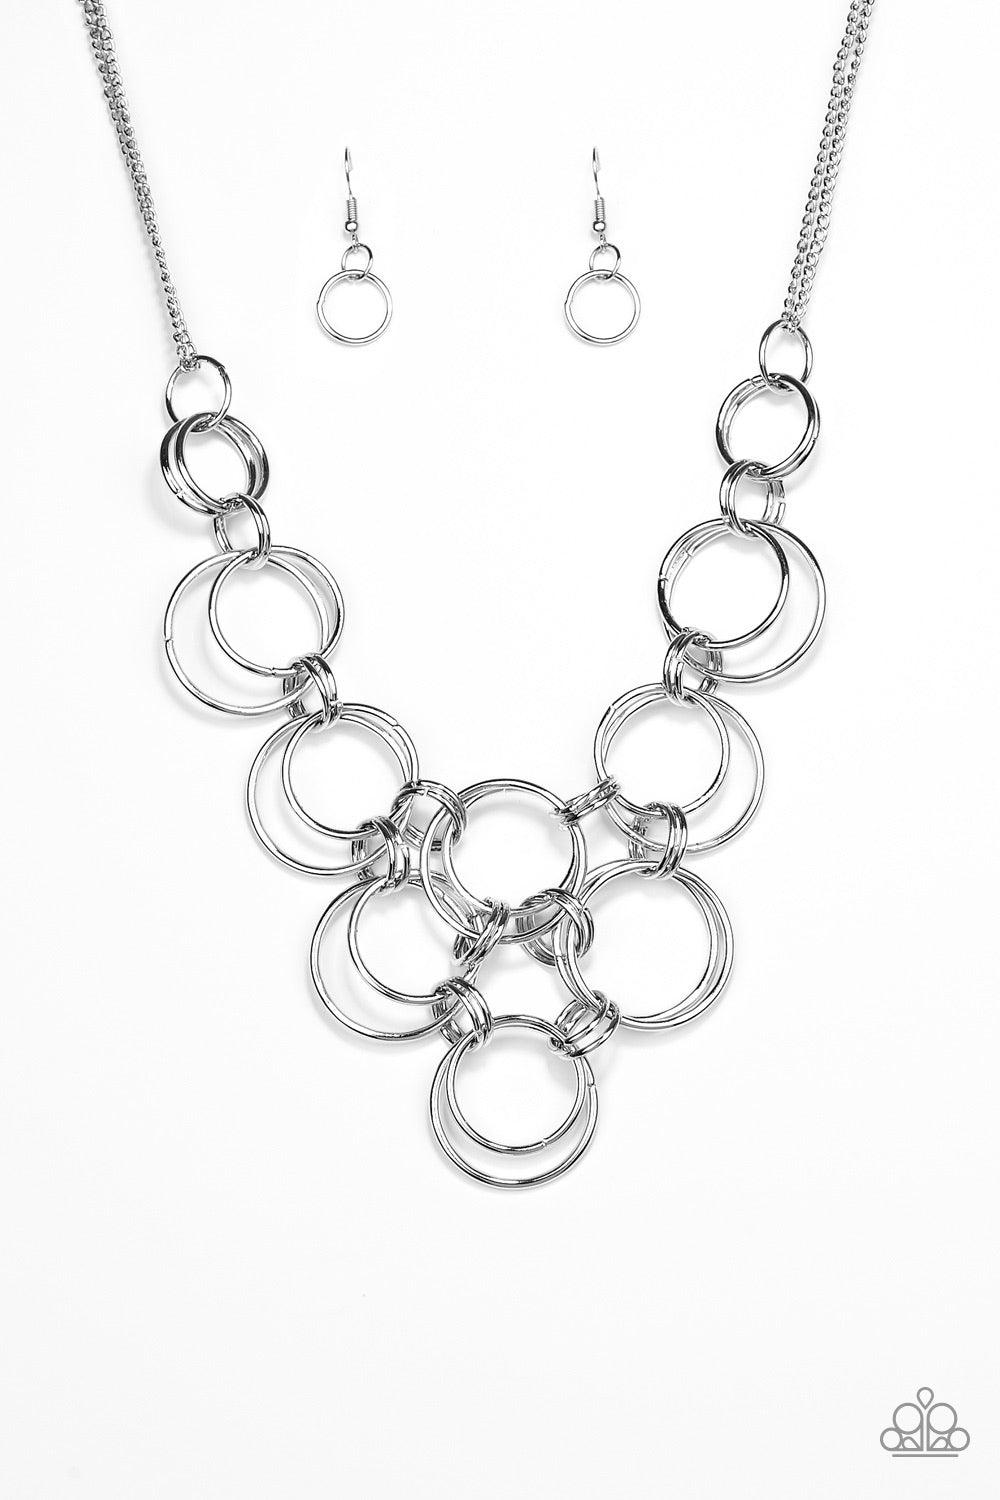 Paparazzi Accessories Ringing Off The Hook - Silver Brushed in a glistening shimmer, silver rings link together below the collar, creating a bold interlocking pendant. Features an adjustable clasp closure. Sold as one individual necklace. Includes one pai